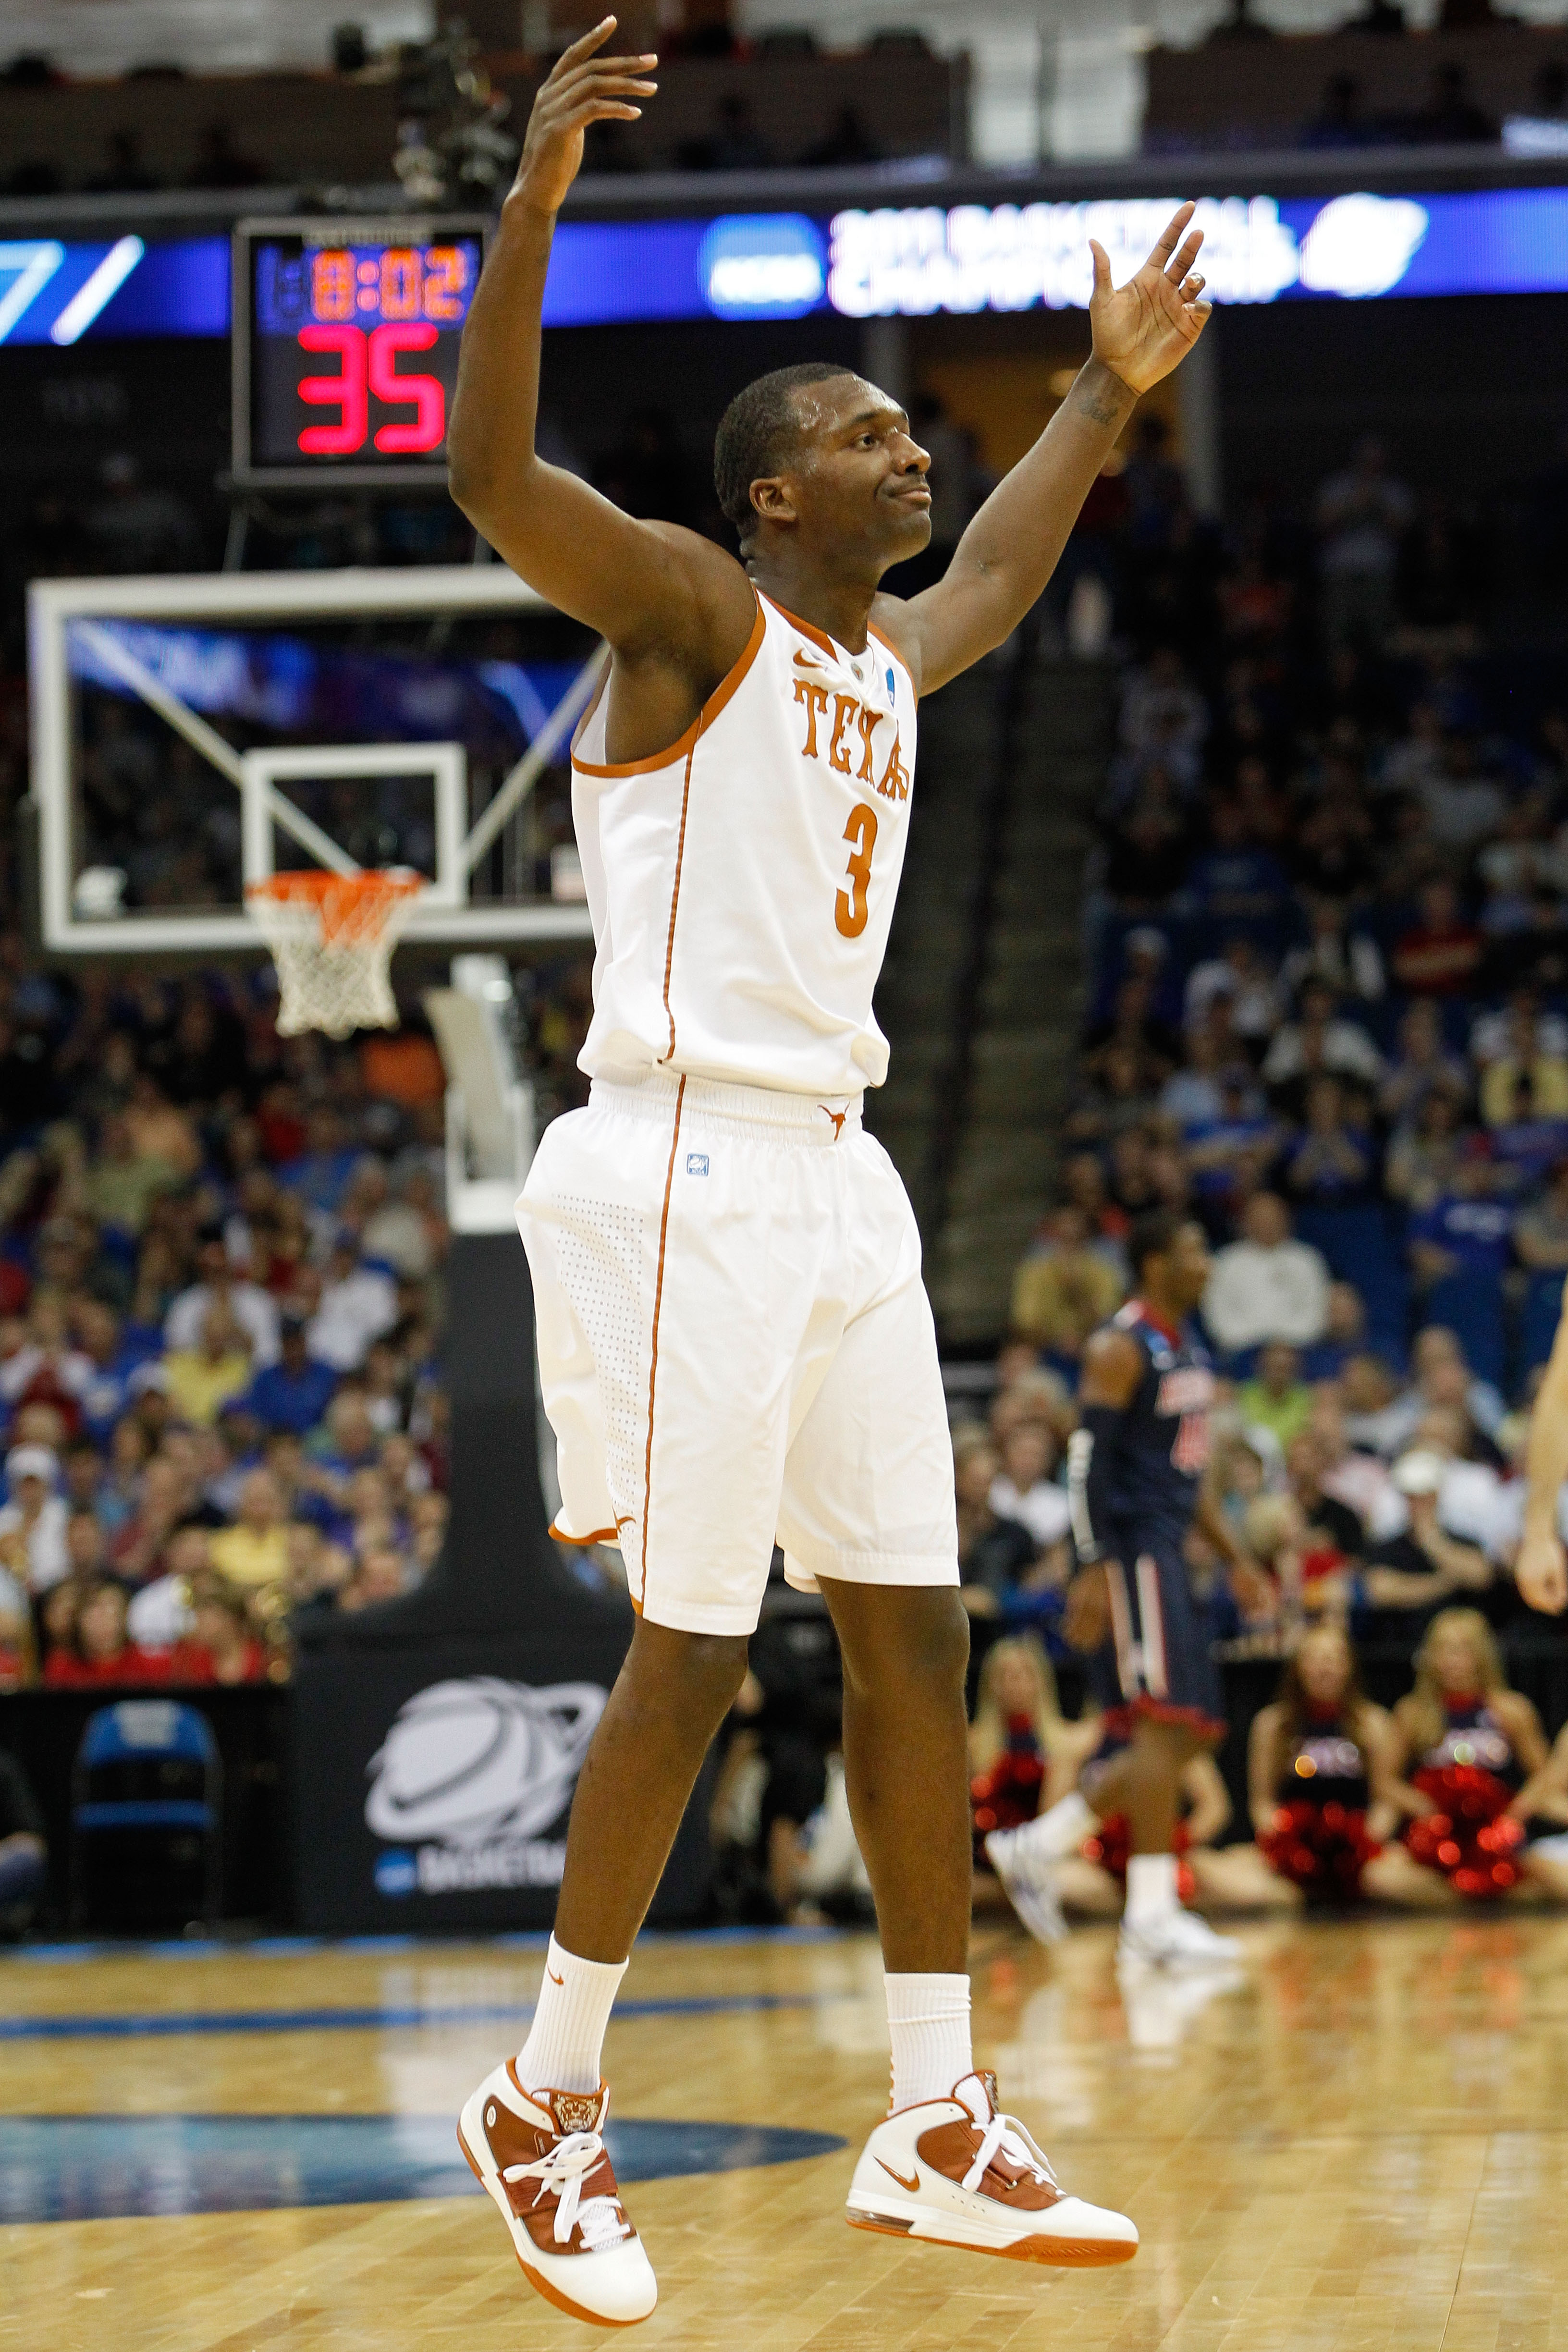 TULSA, OK - MARCH 20:  Jordan Hamilton #3 of the Texas Longhorns celebrates after a play against the Arizona Wildcats during the third round of the 2011 NCAA men's basketball tournament at BOK Center on March 20, 2011 in Tulsa, Oklahoma.  (Photo by Tom Pe